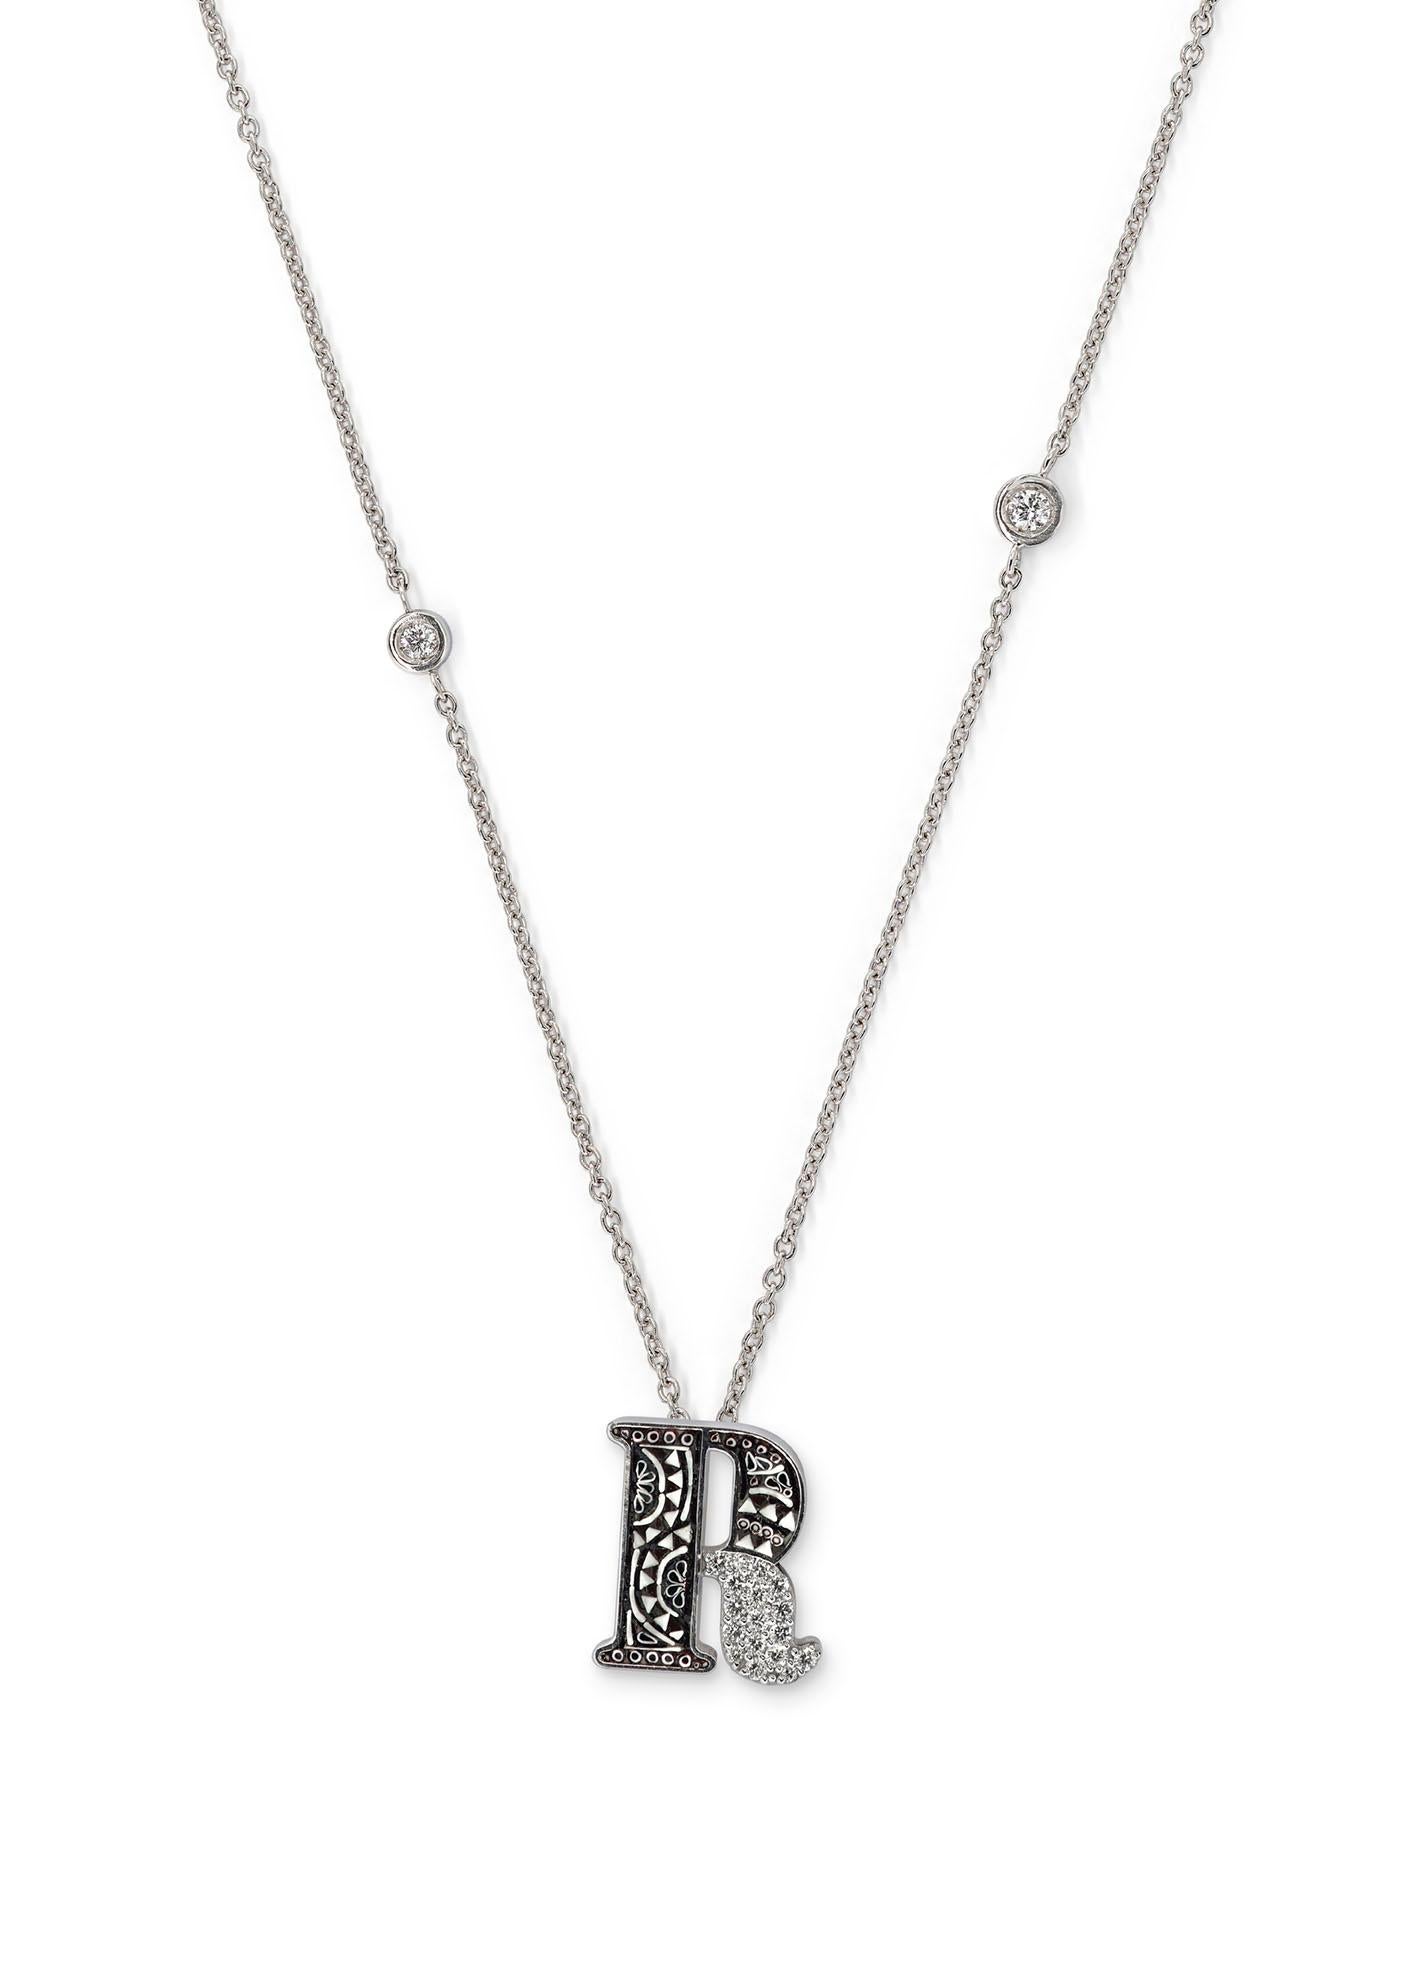 Brilliant Cut Necklace Letter R White Gold White Diamonds Hand Decorated with Micromosaic For Sale